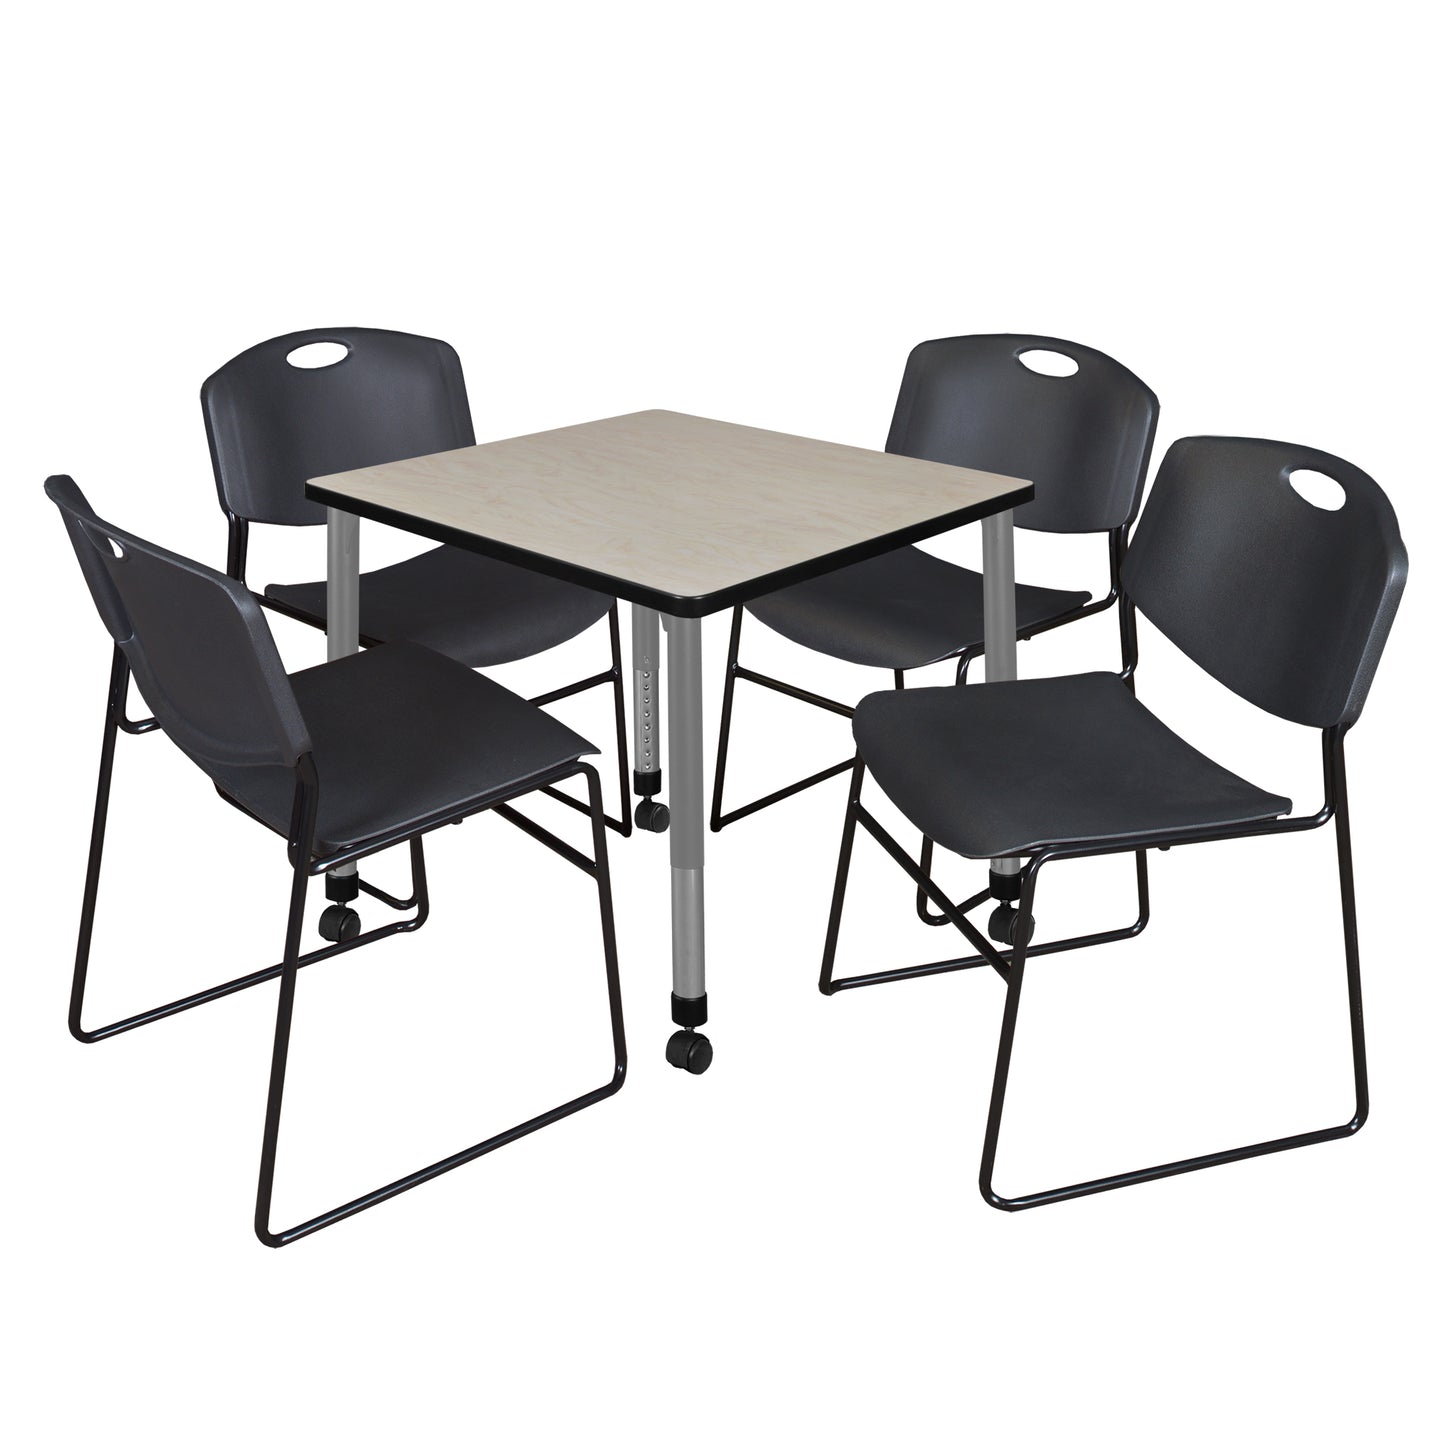 Regency Kee 30 in. Square Adjustable Classroom Table & 4 Zeng Stack Chairs